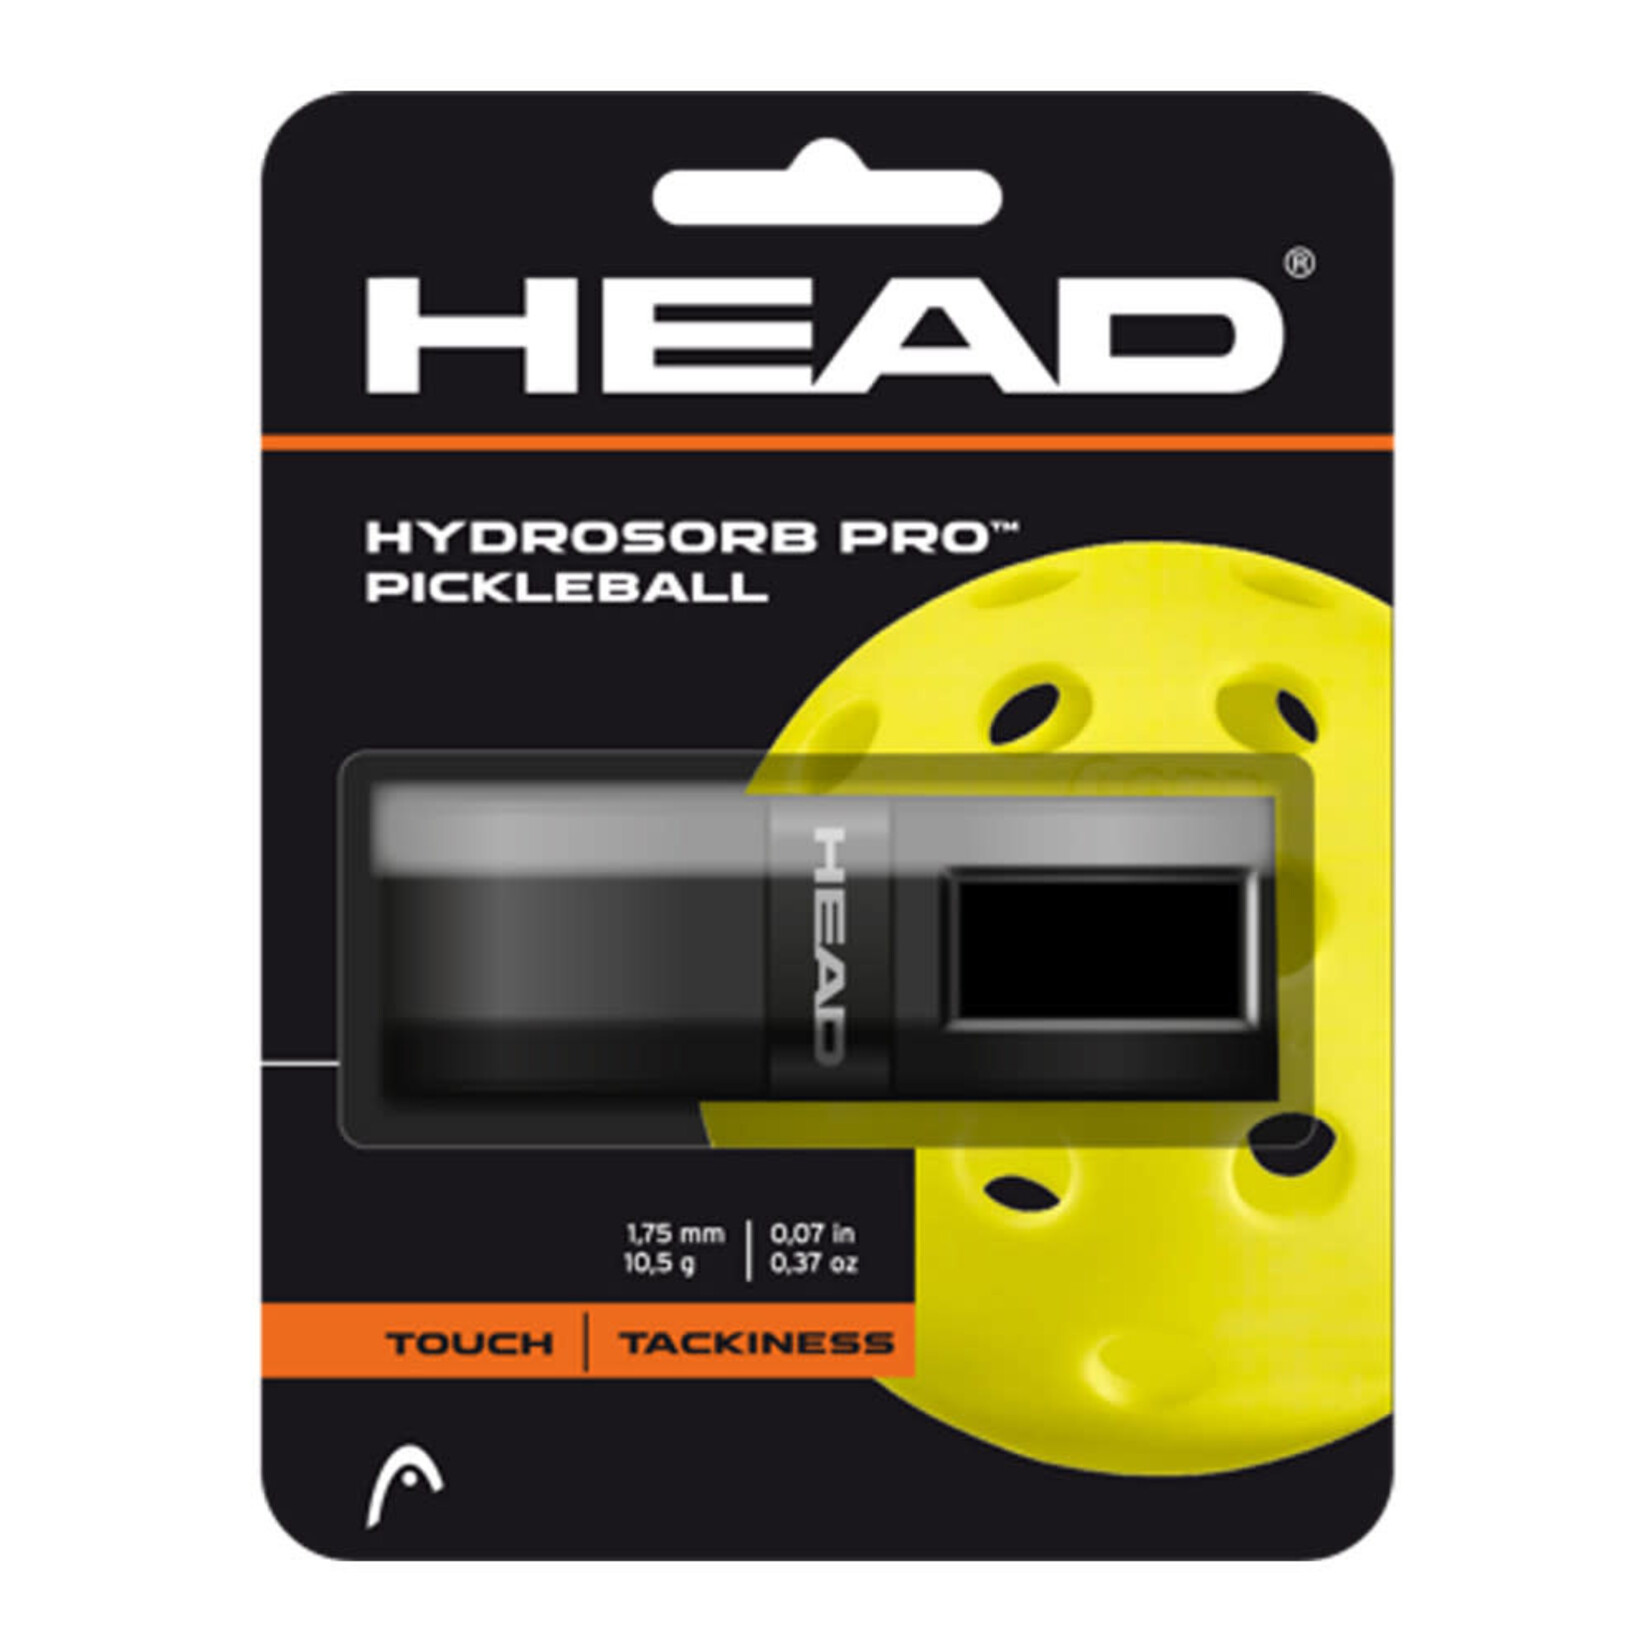 Head Head Hydrosorb Pro Pickleball Replacement Grips